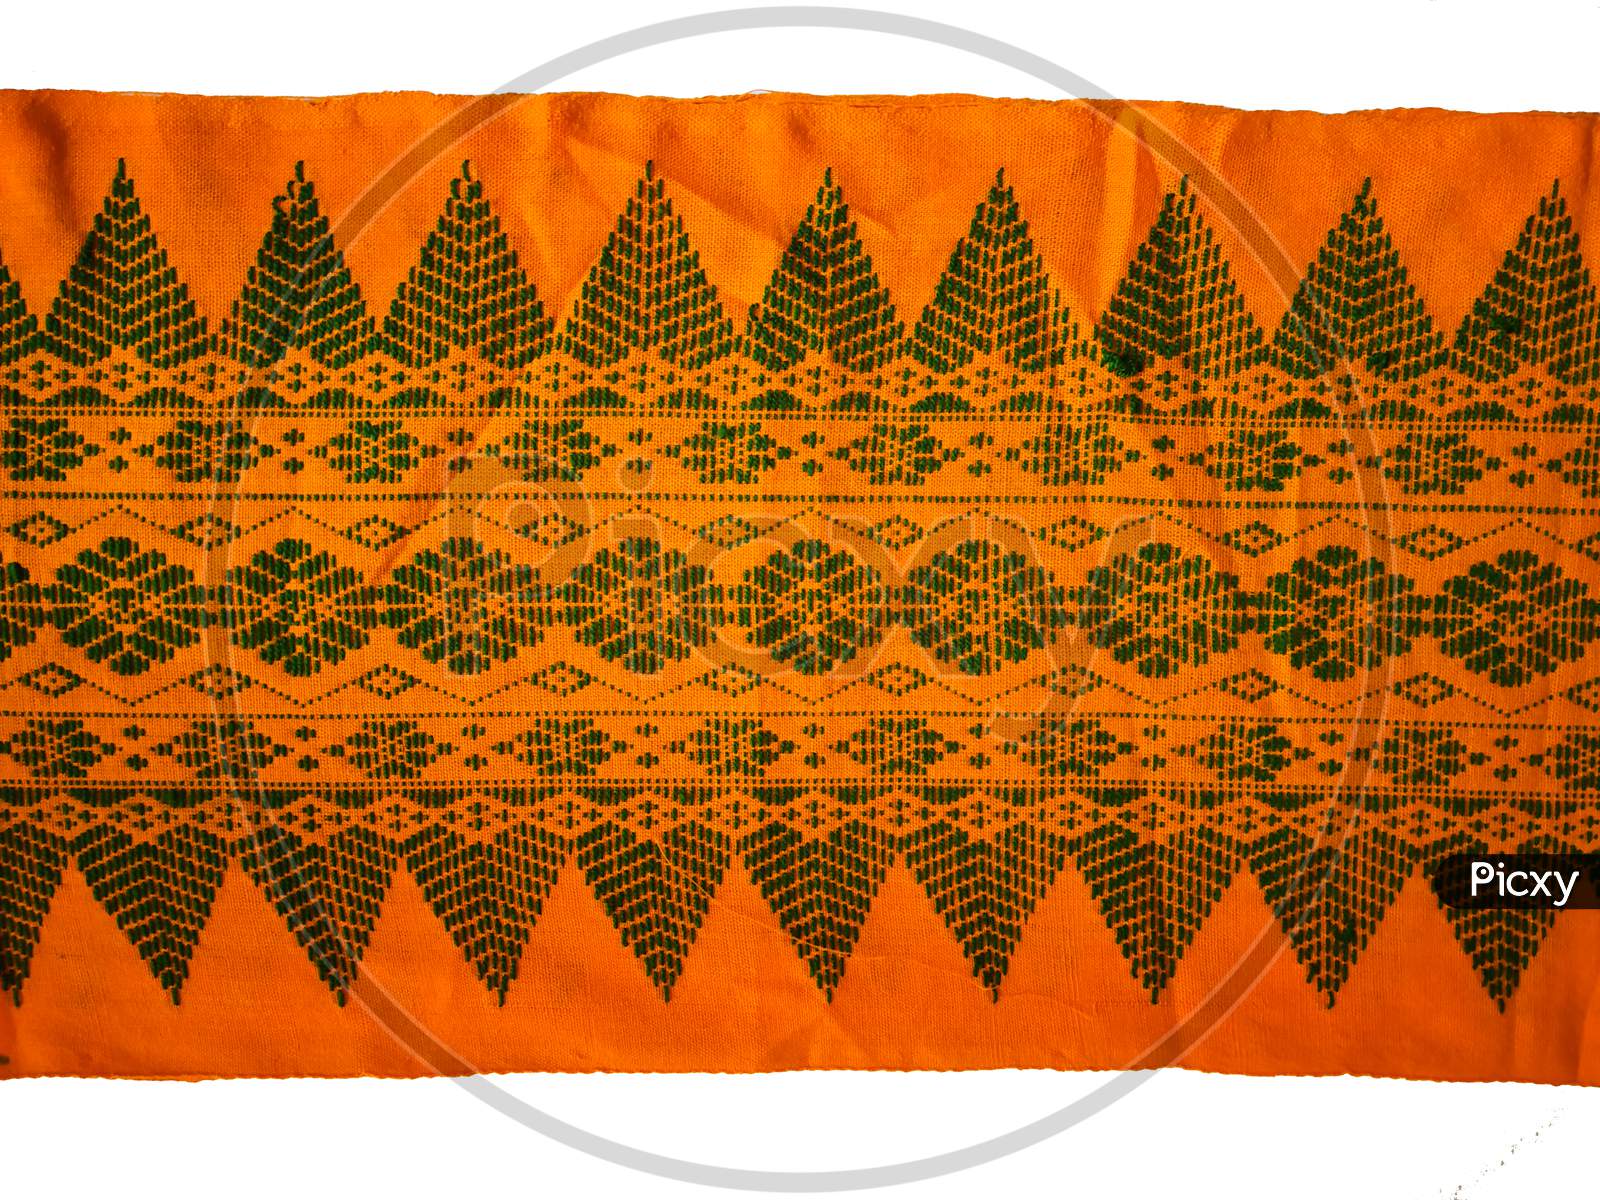 aronai ( arnai ) . Aronai is a small Scarf, used both by Men and Women. Aronai is the sign of Boro tradition and is used to felicitate guests with honour, as a gift. In winter.